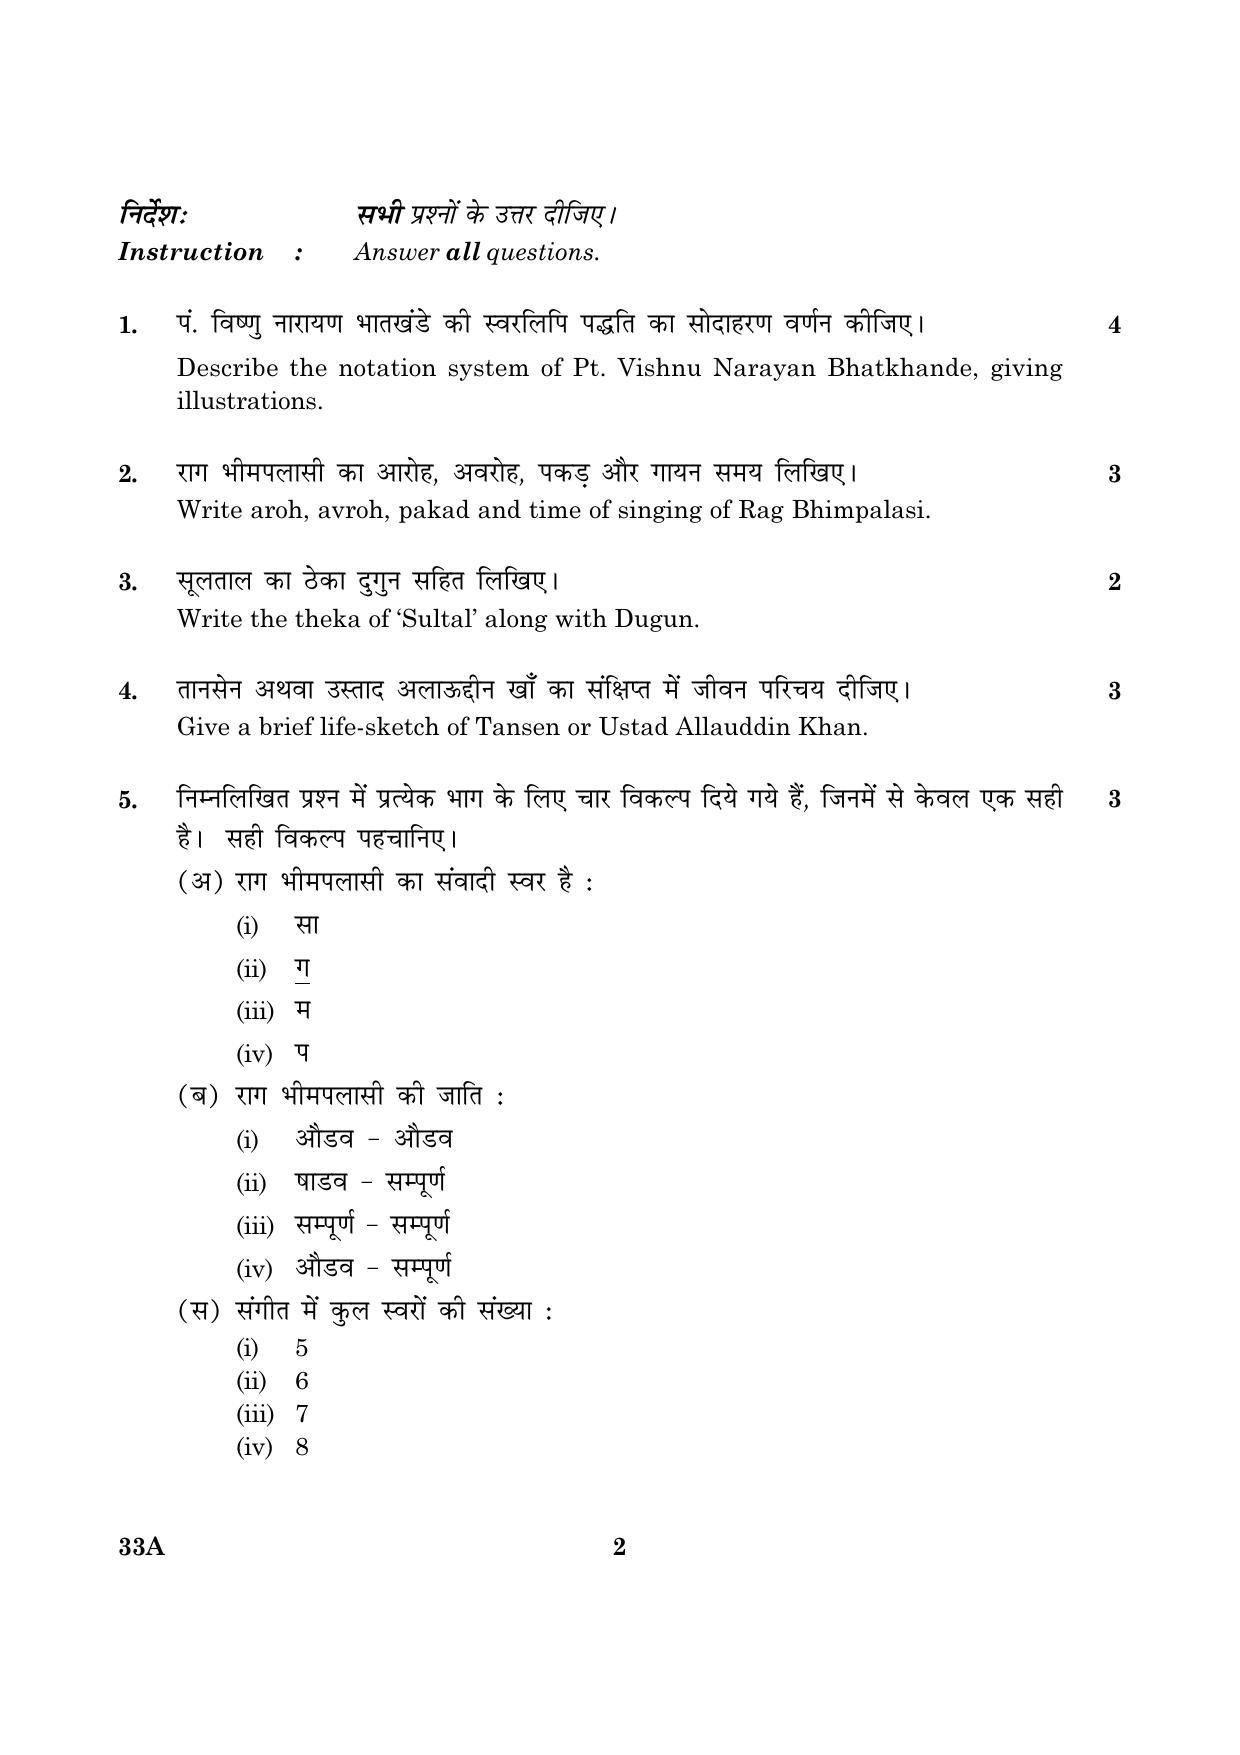 CBSE Class 10 033A  Hindustani Music 2016 Question Paper - Page 2